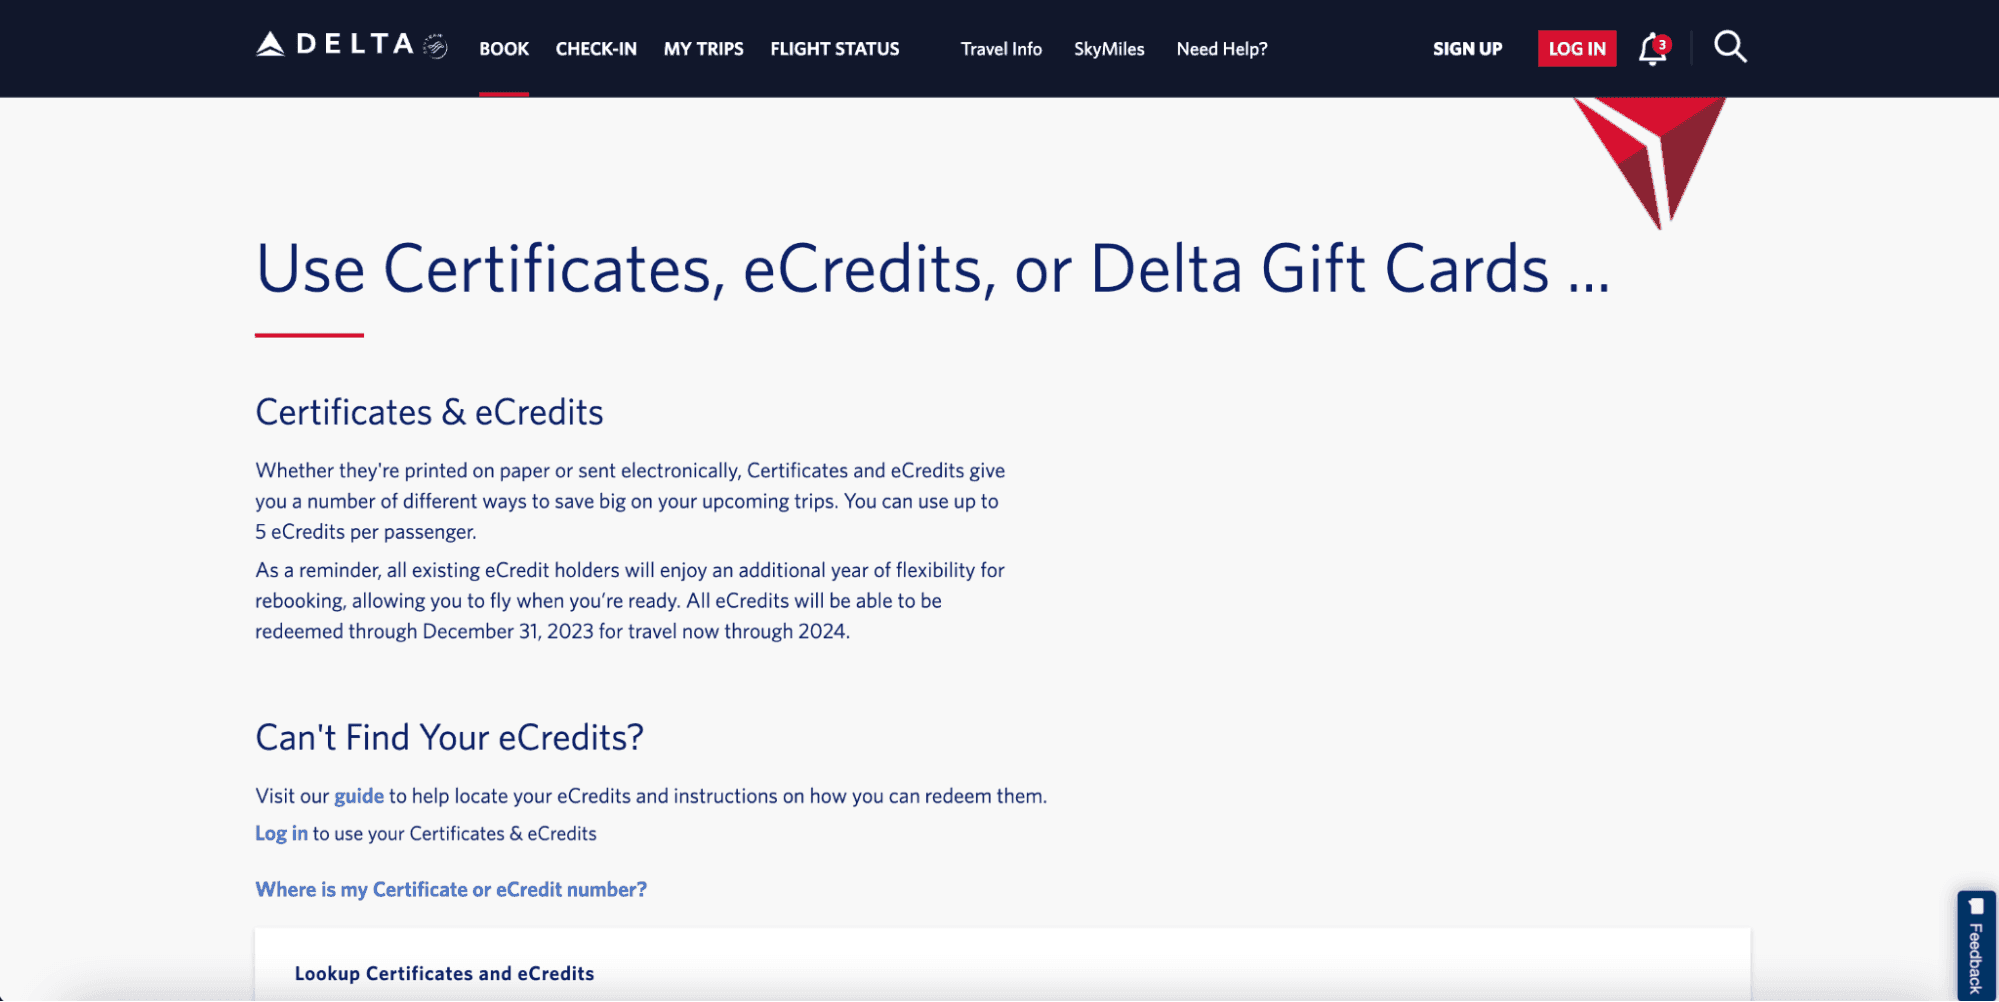 A screenshot of the Delta website, displaying information about vouchers Delta offers their customers.